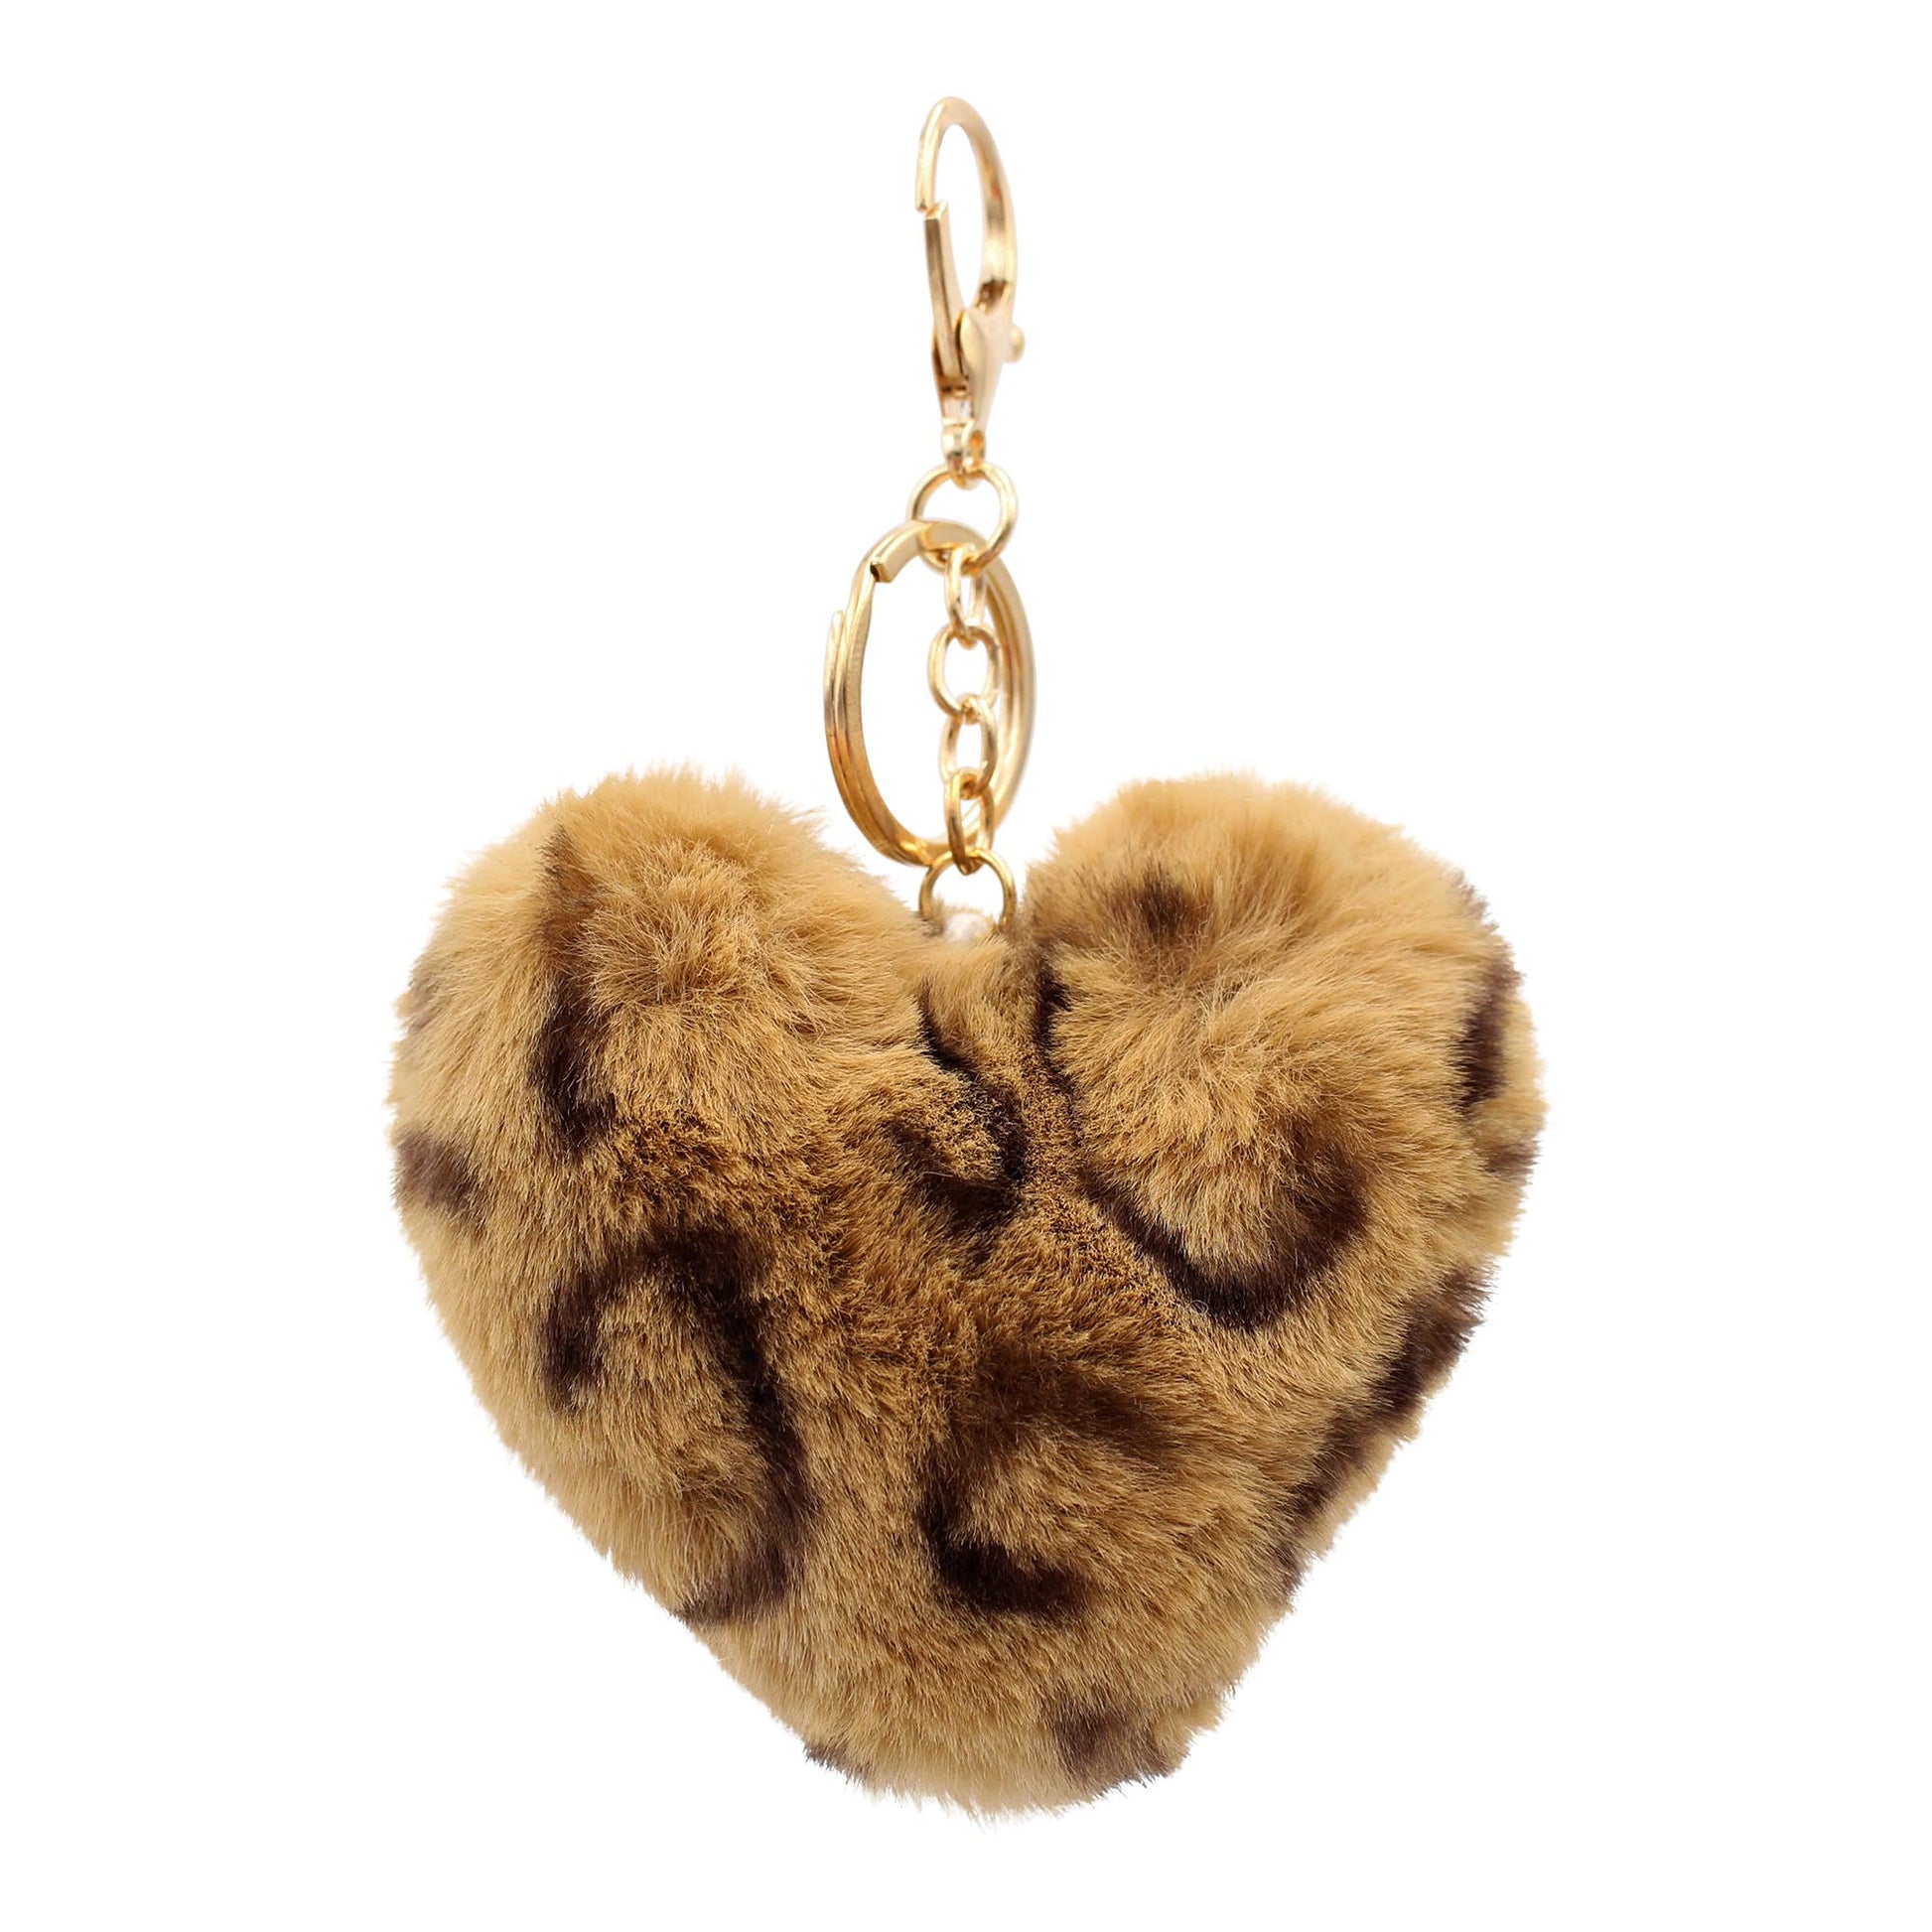 Image of Real Sic Leopard Pom Pom Fuzzy  Heart Key Chain for girl's bag and purse